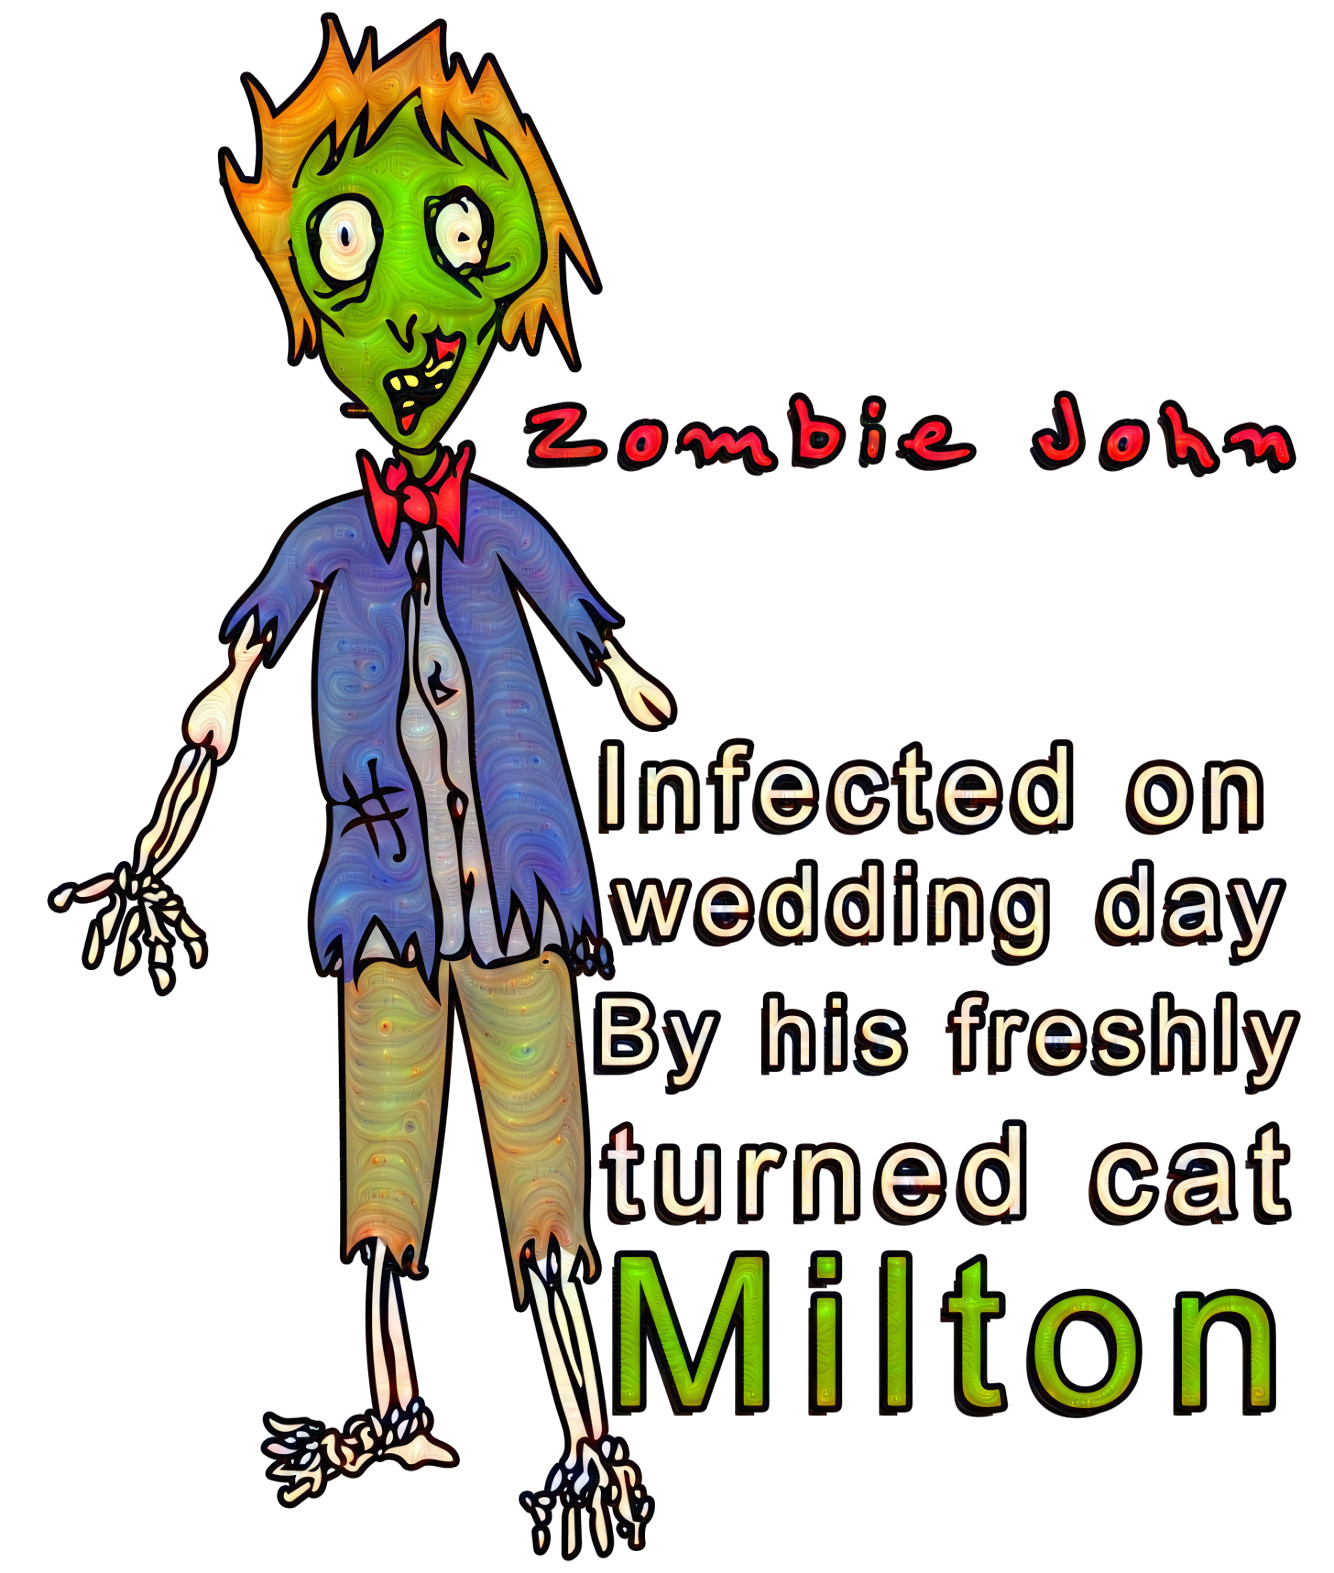 Zombie John- one of my drawings I'm making into a series called "Zombie Obituaries". I'm putting each zombie on stuff in my Redbubble shop. Yep.